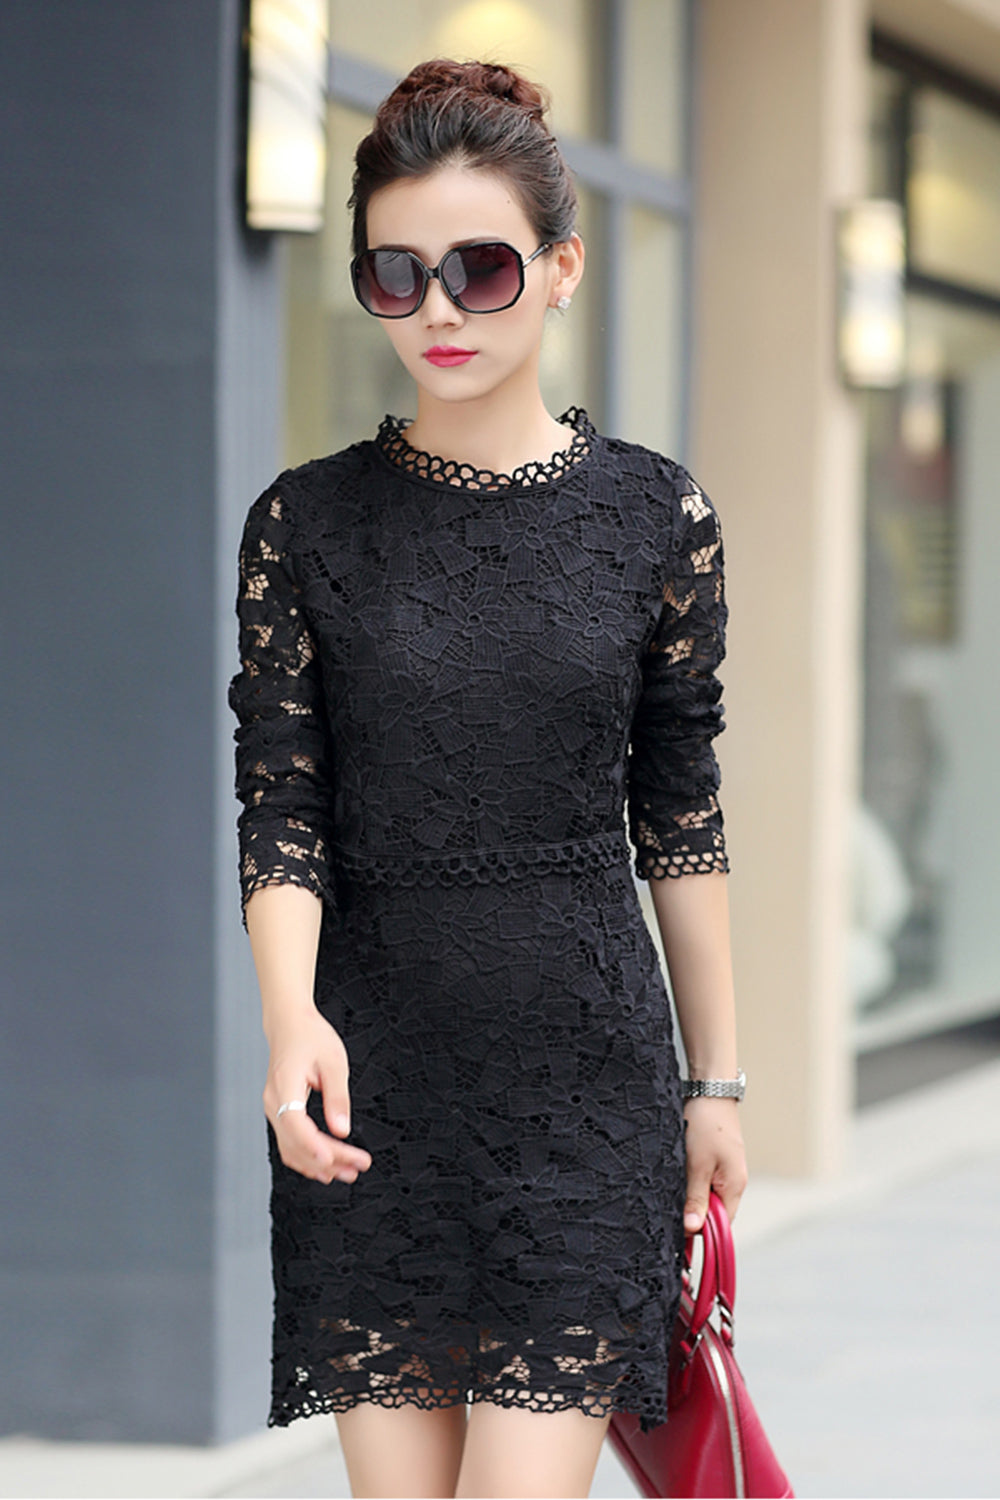 Ketty More Women Short Length Lace Decorated Shift Dress-KMWD409